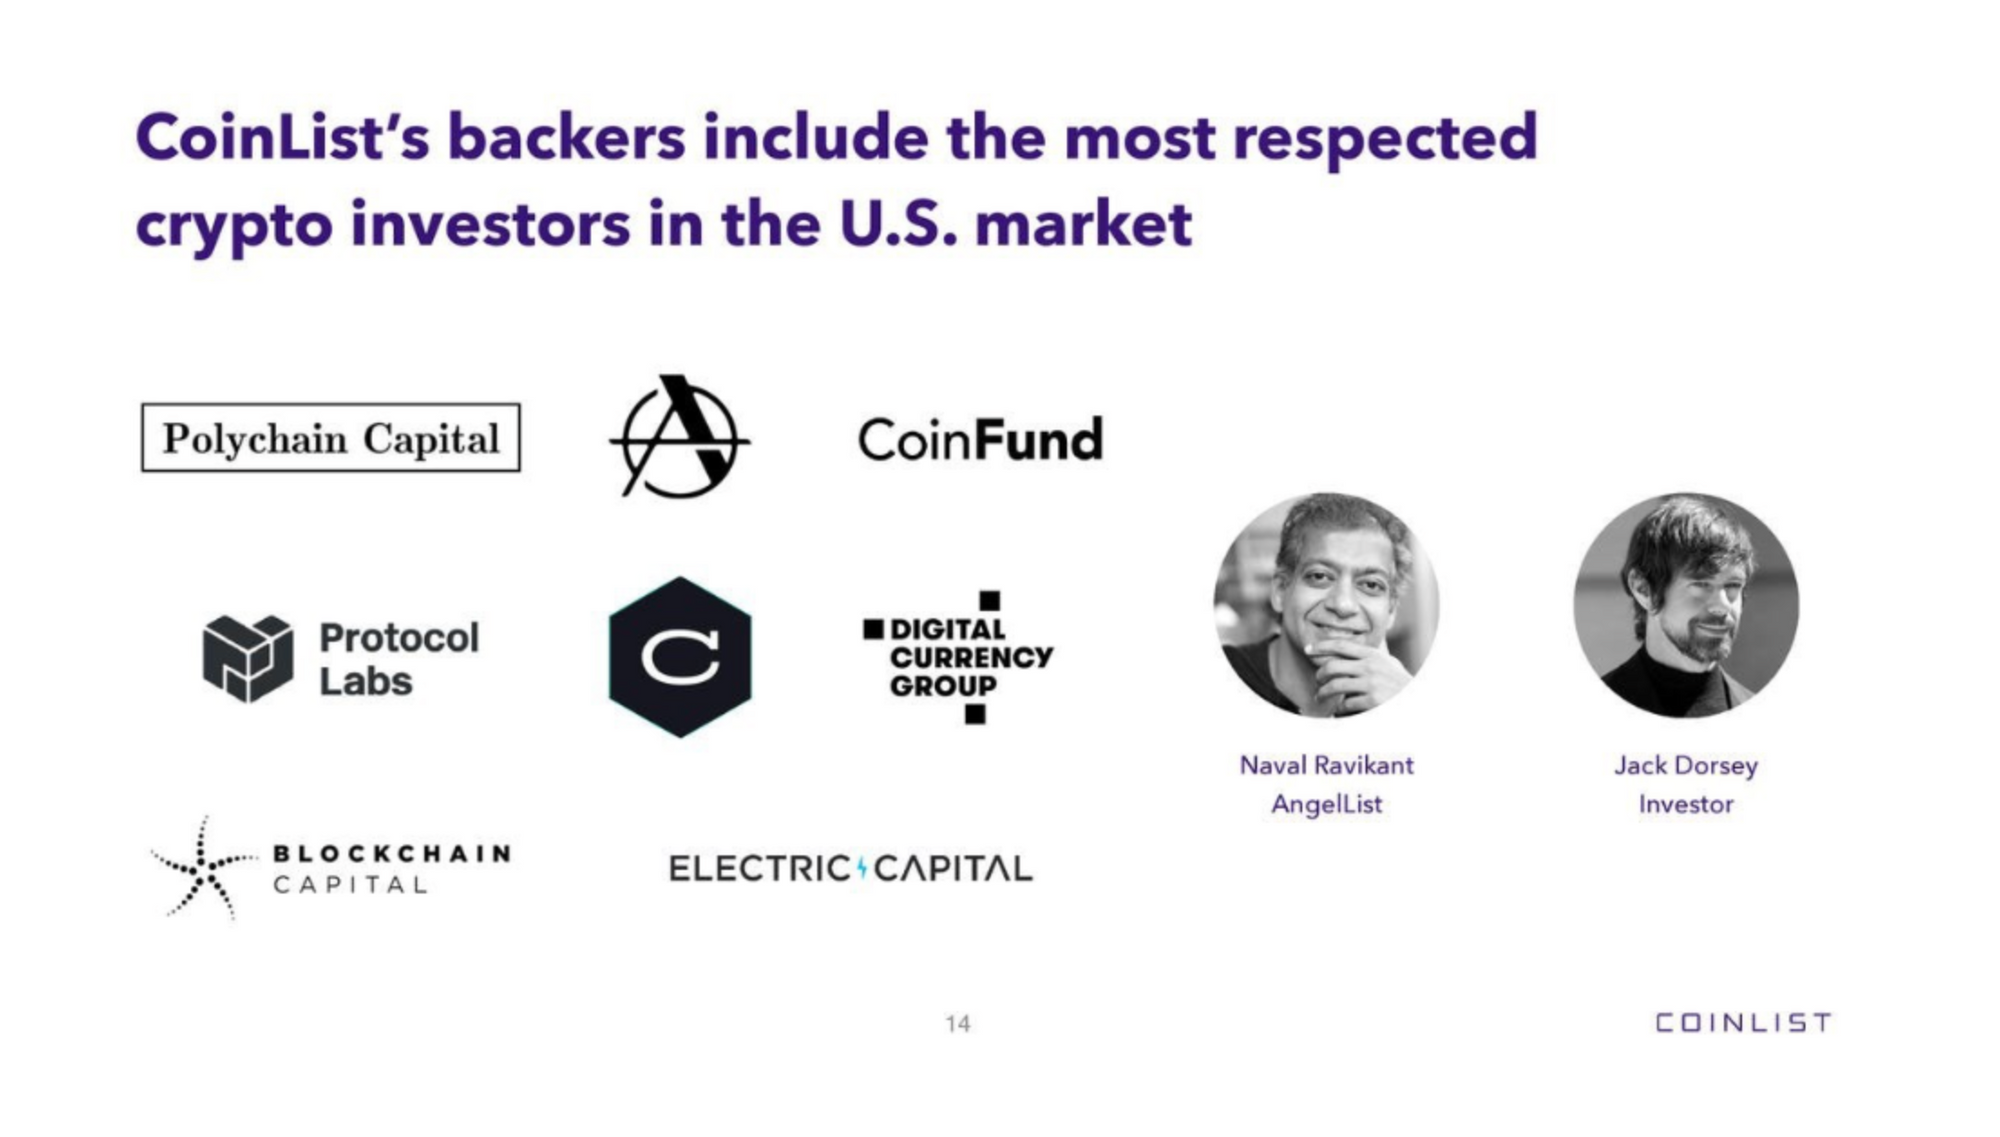 Coinlist fundraising pitch deck: Backers